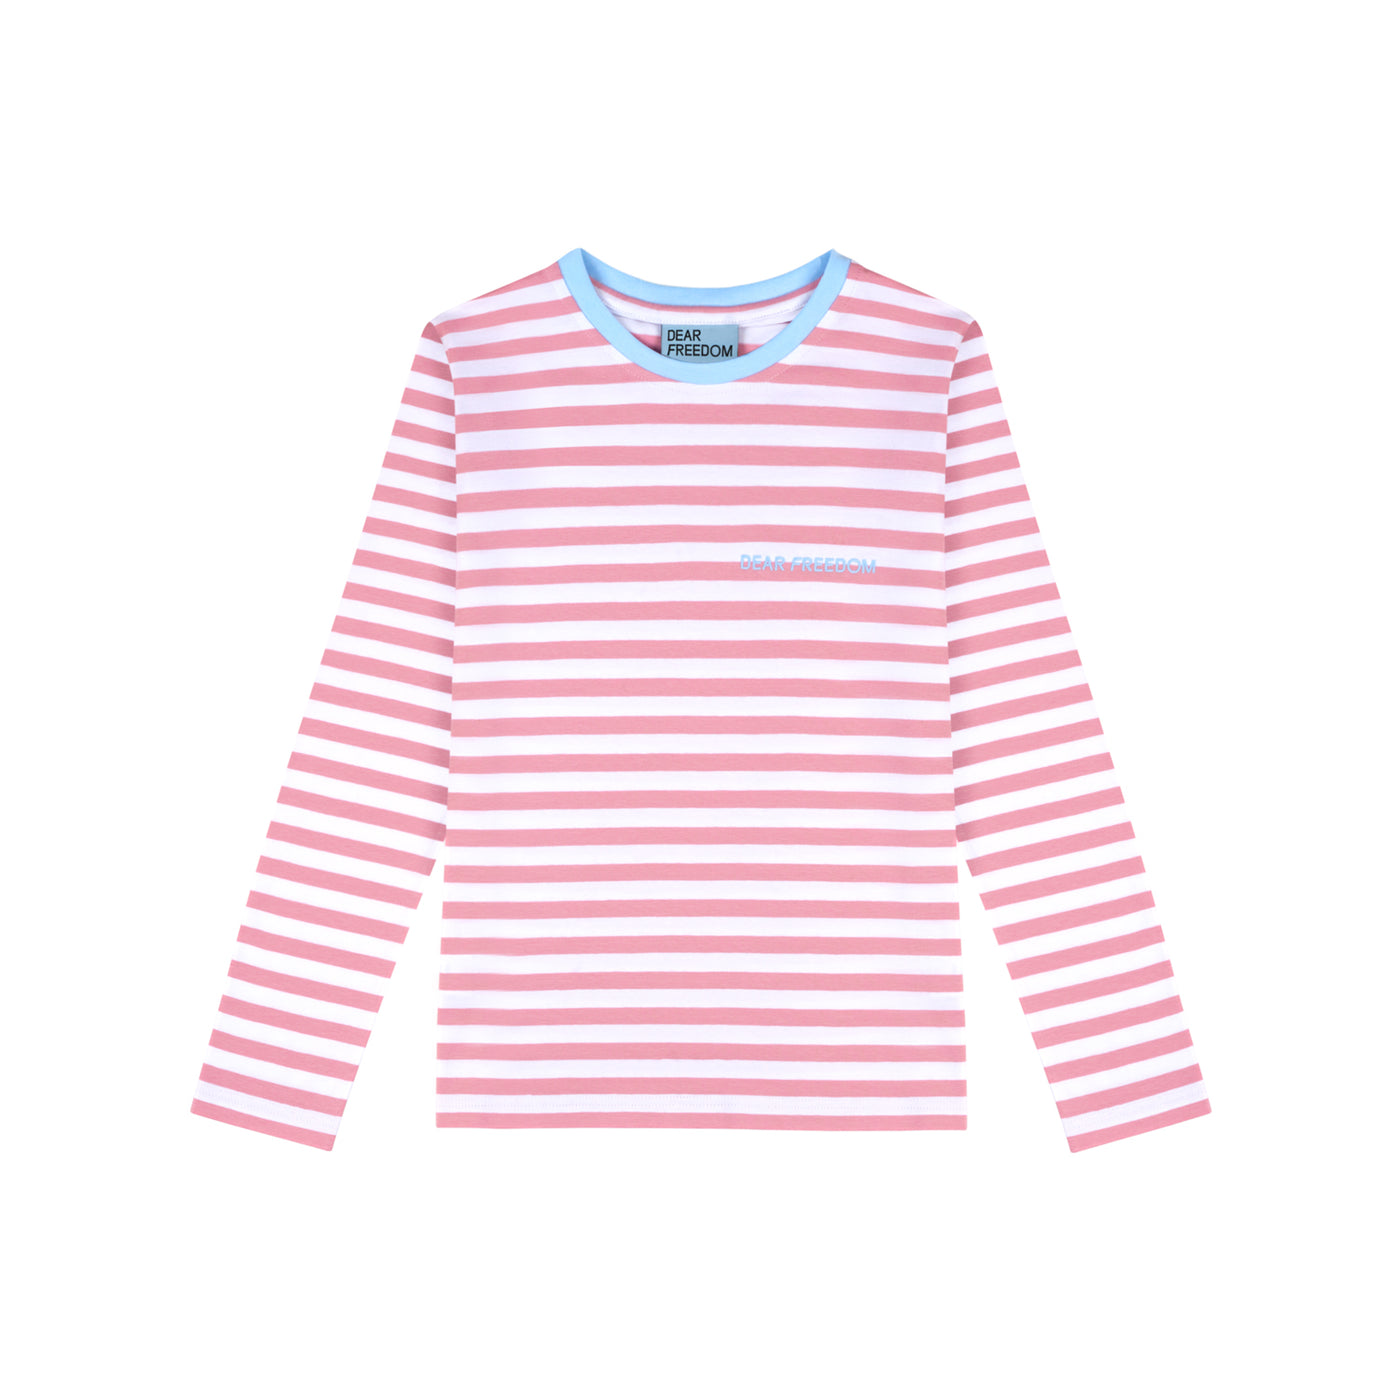 Pink Striped Cotton Top